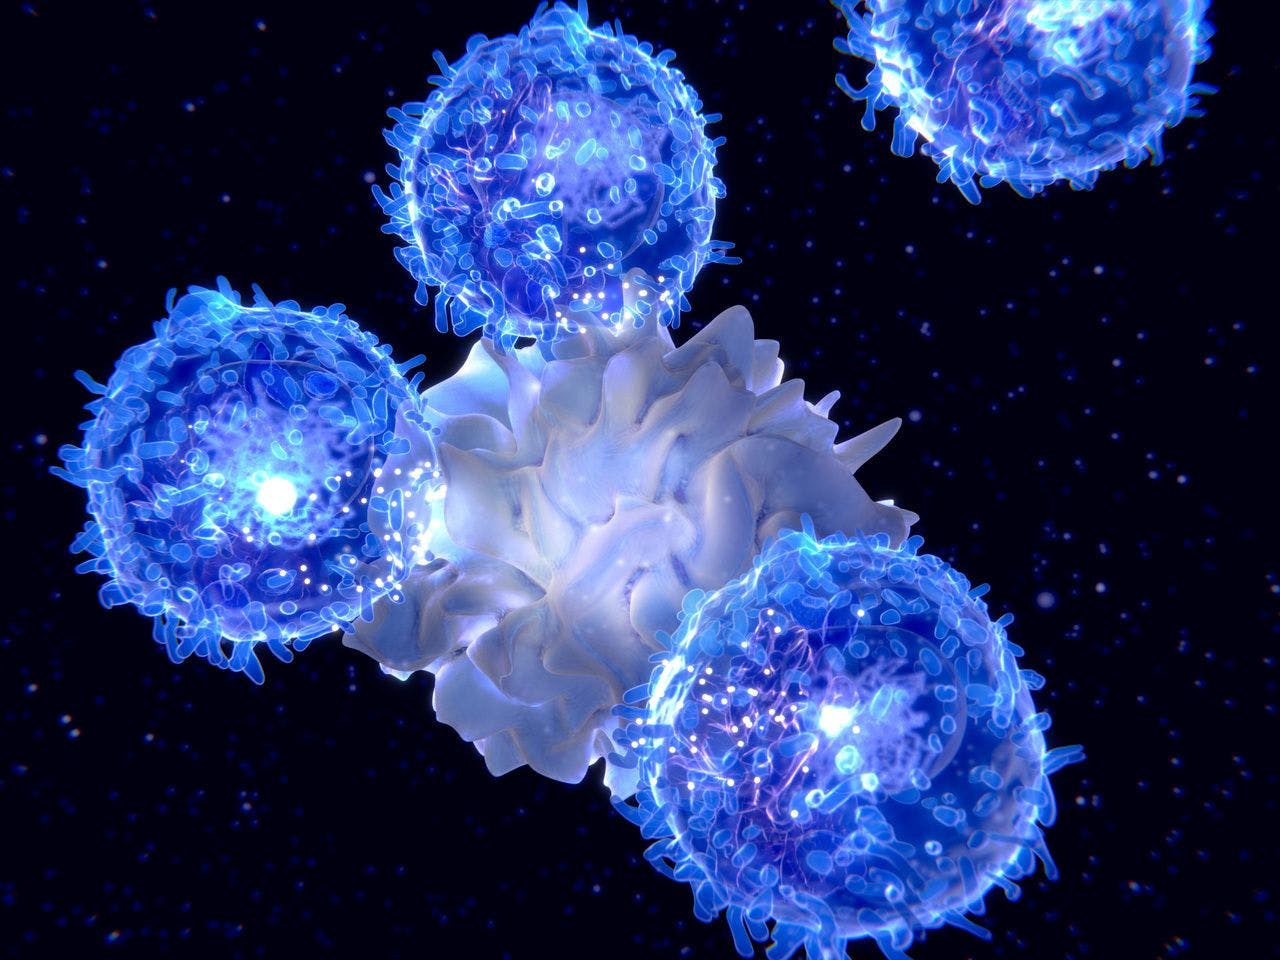 Case Study Highlights Potential Link Between TKIs and Lymphoplasmacytic Lymphoma